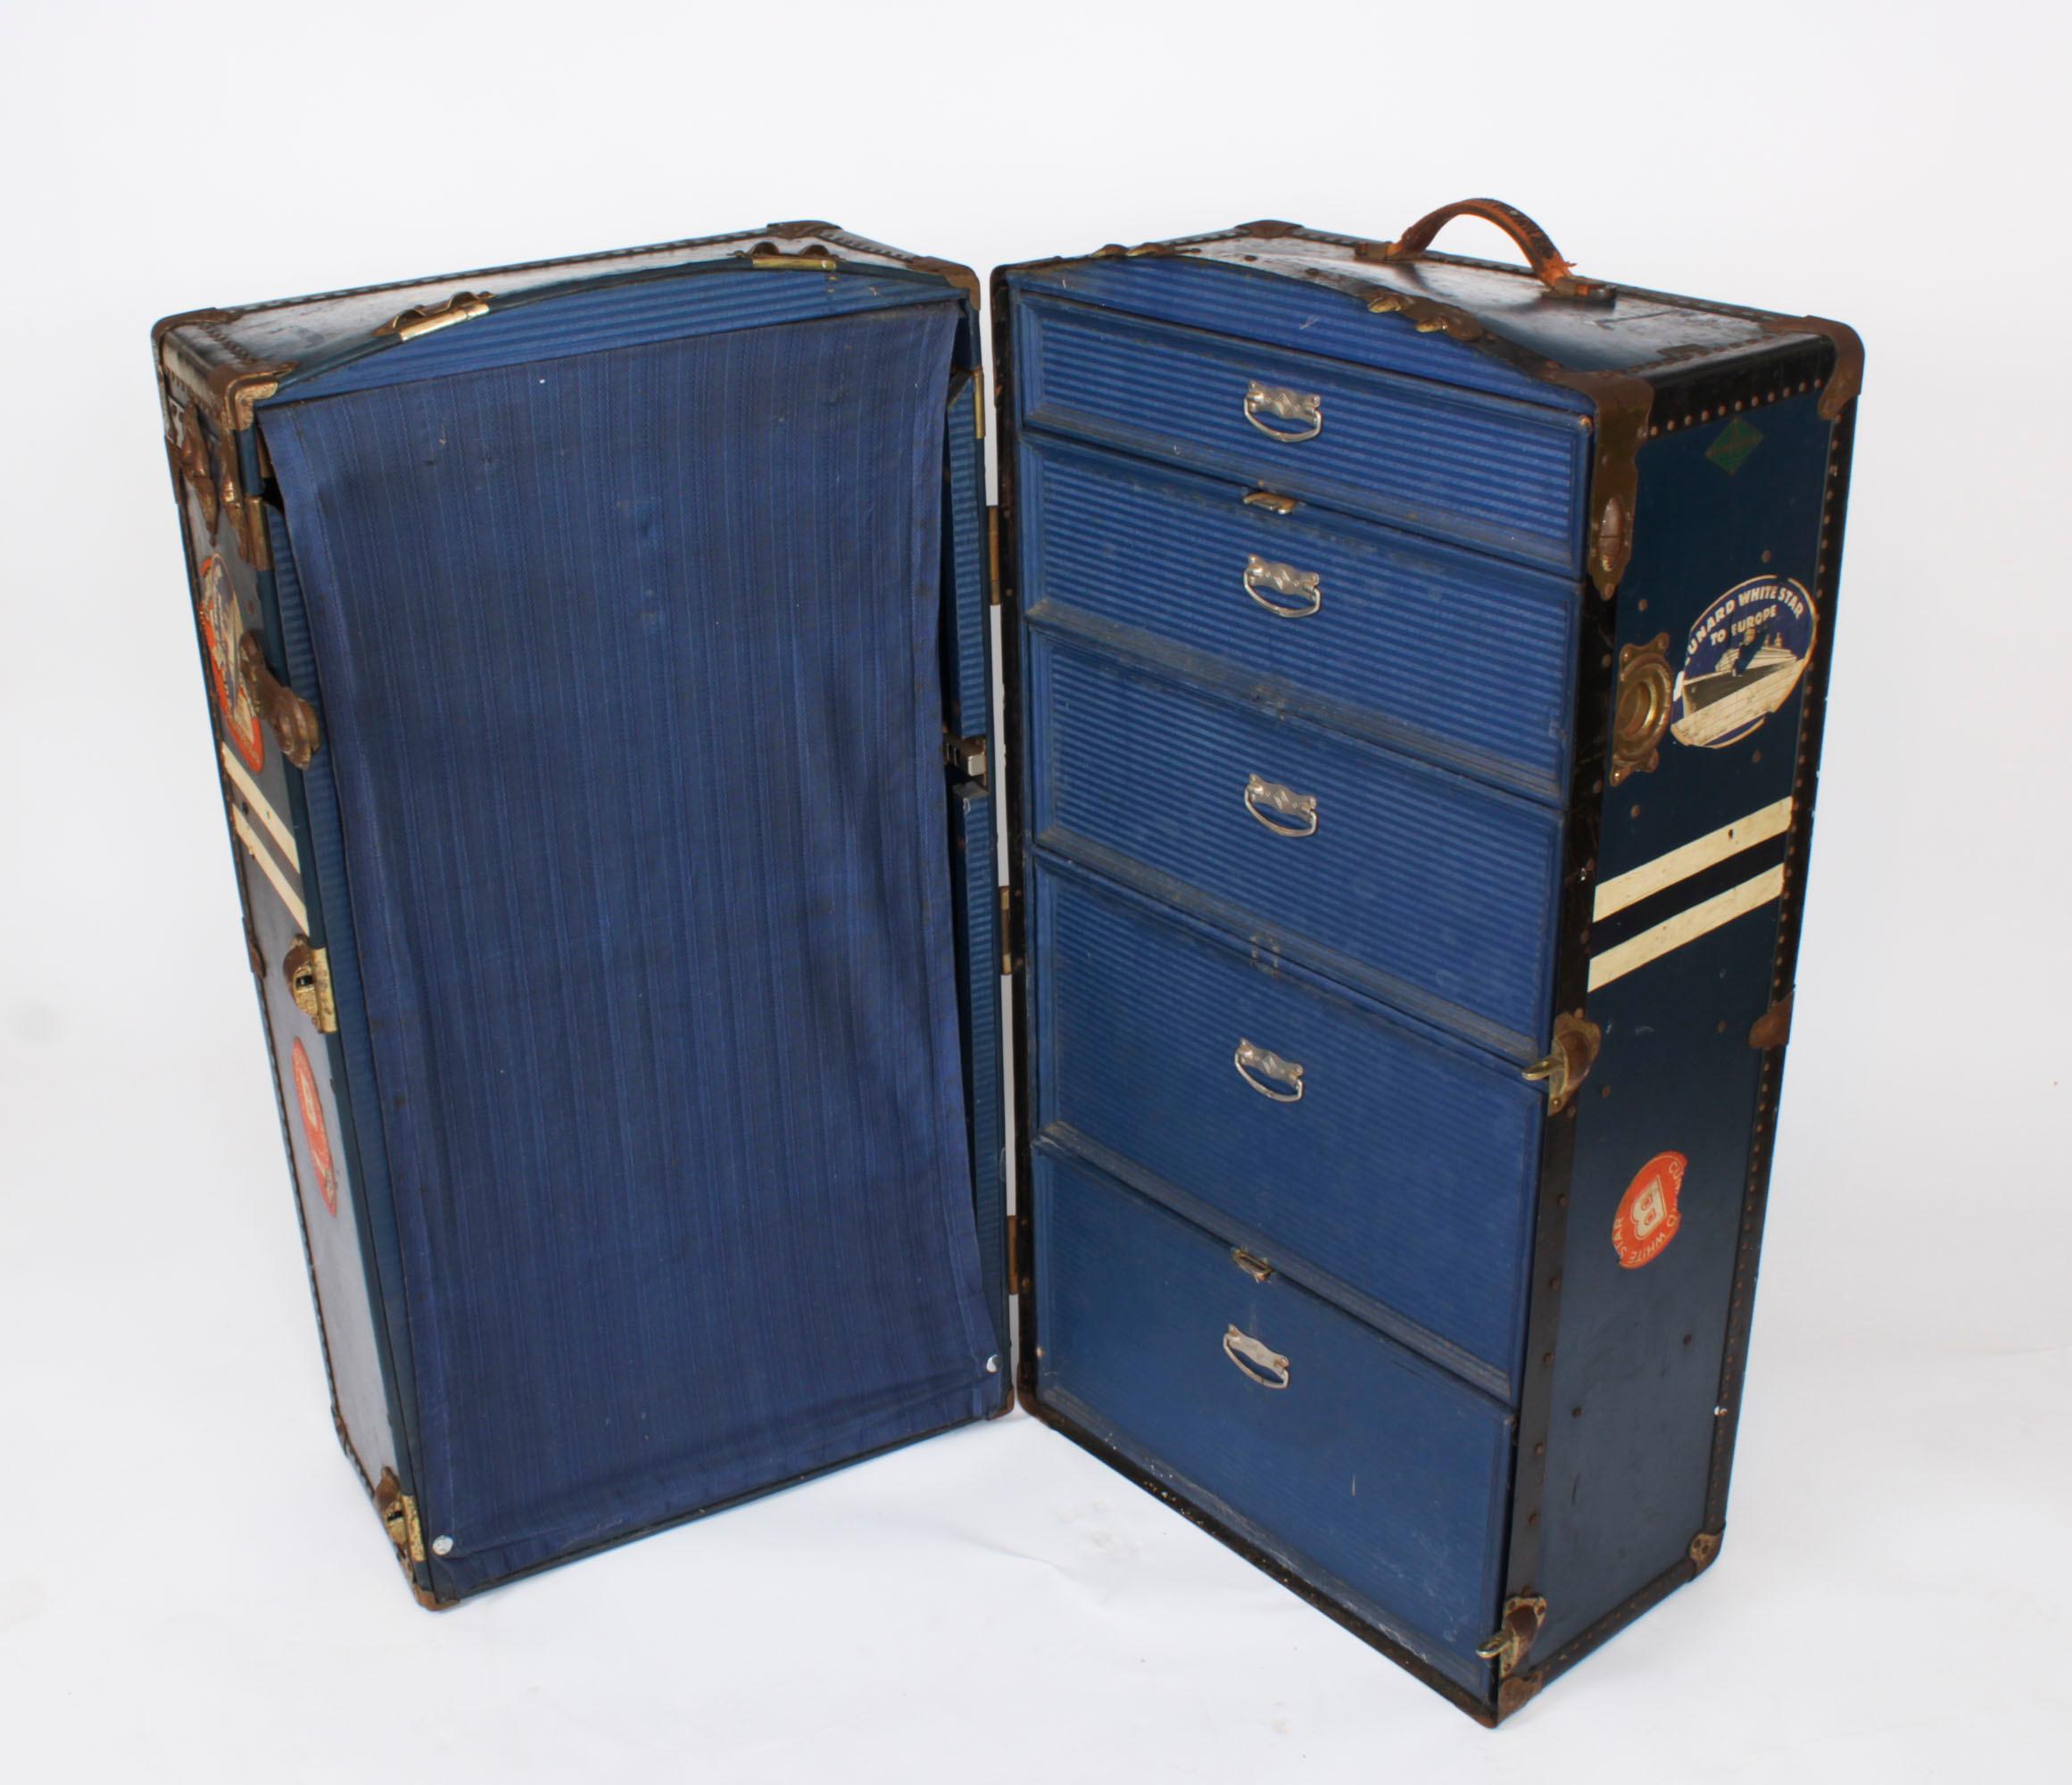 Antique Wardrobe Steamers Trunk Luggage C1930 For Sale 7